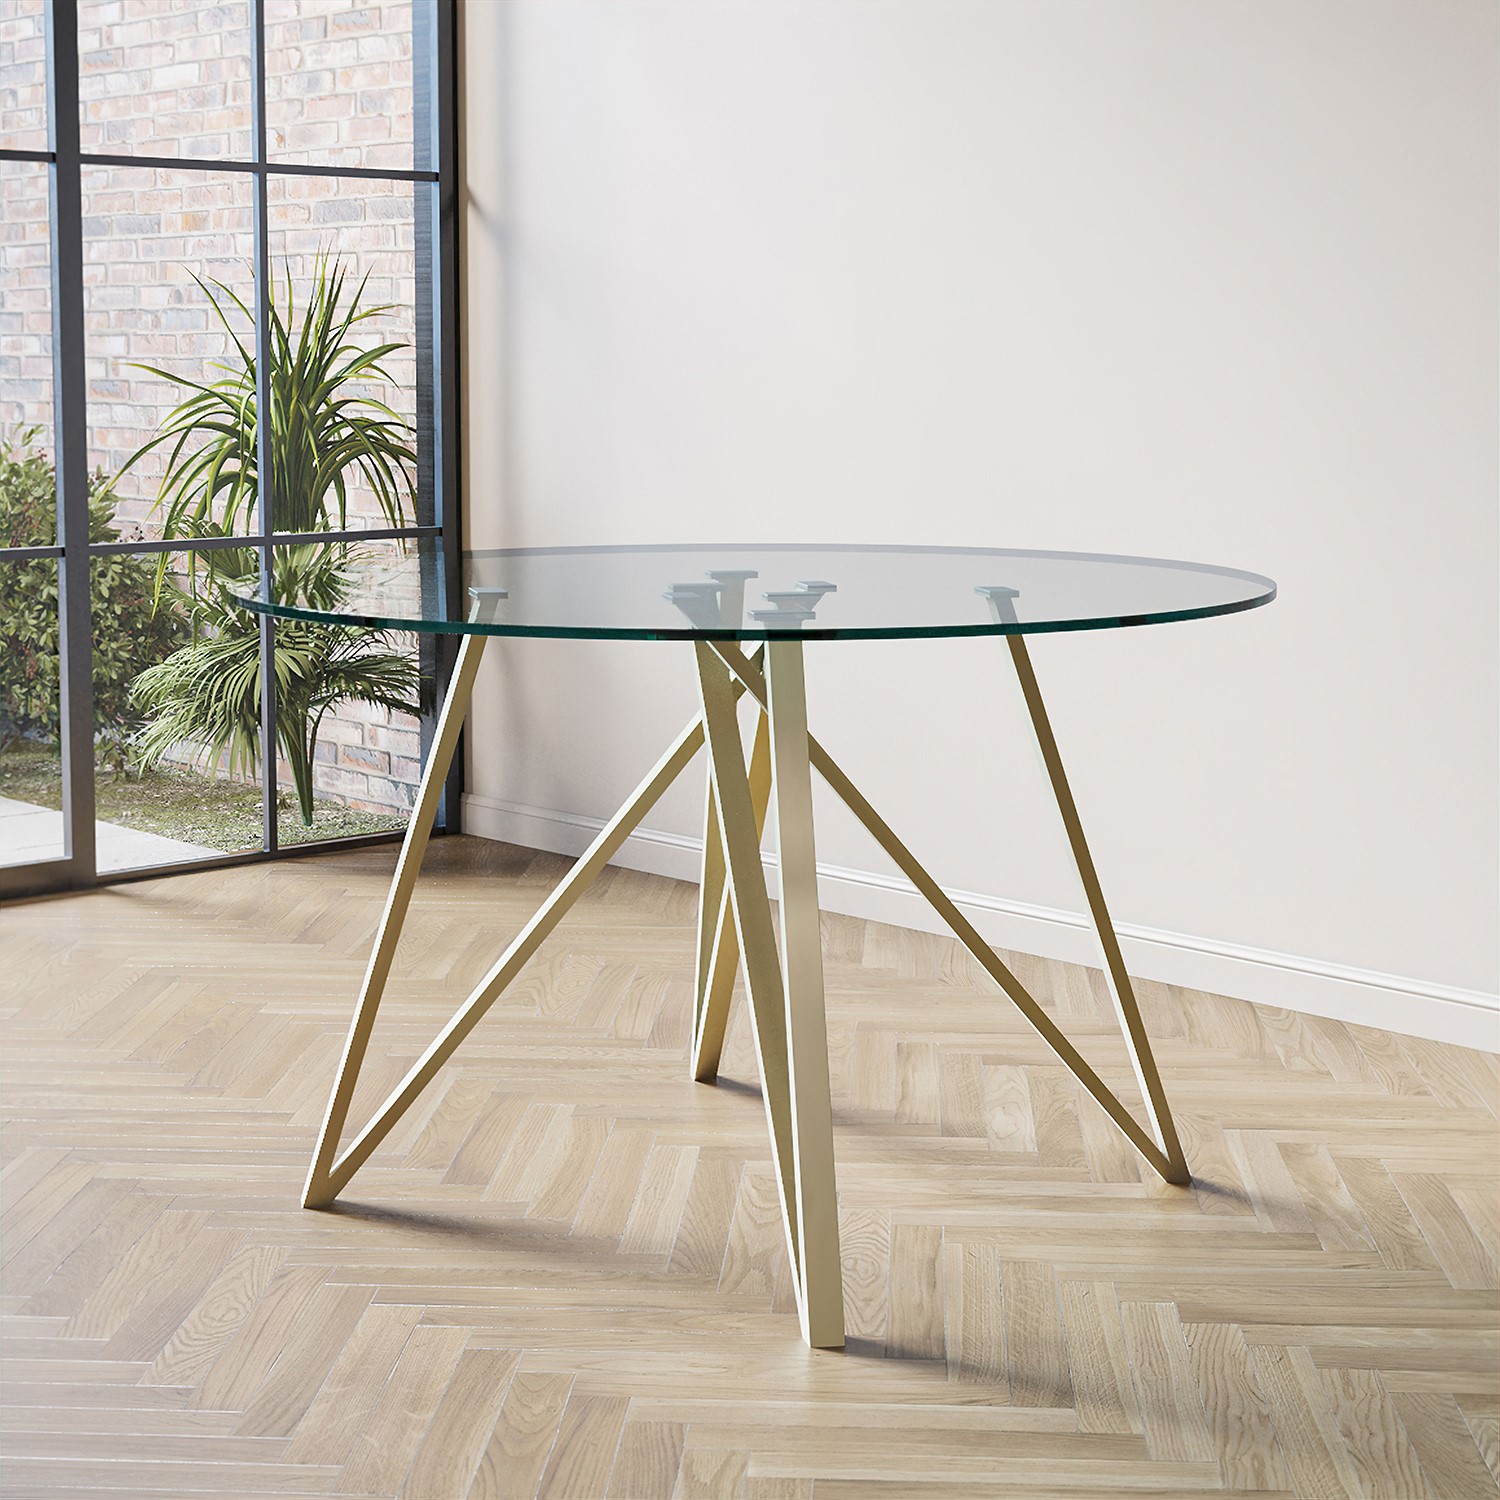 Photo of Round glass dining table with gold legs - seats 4 - dax